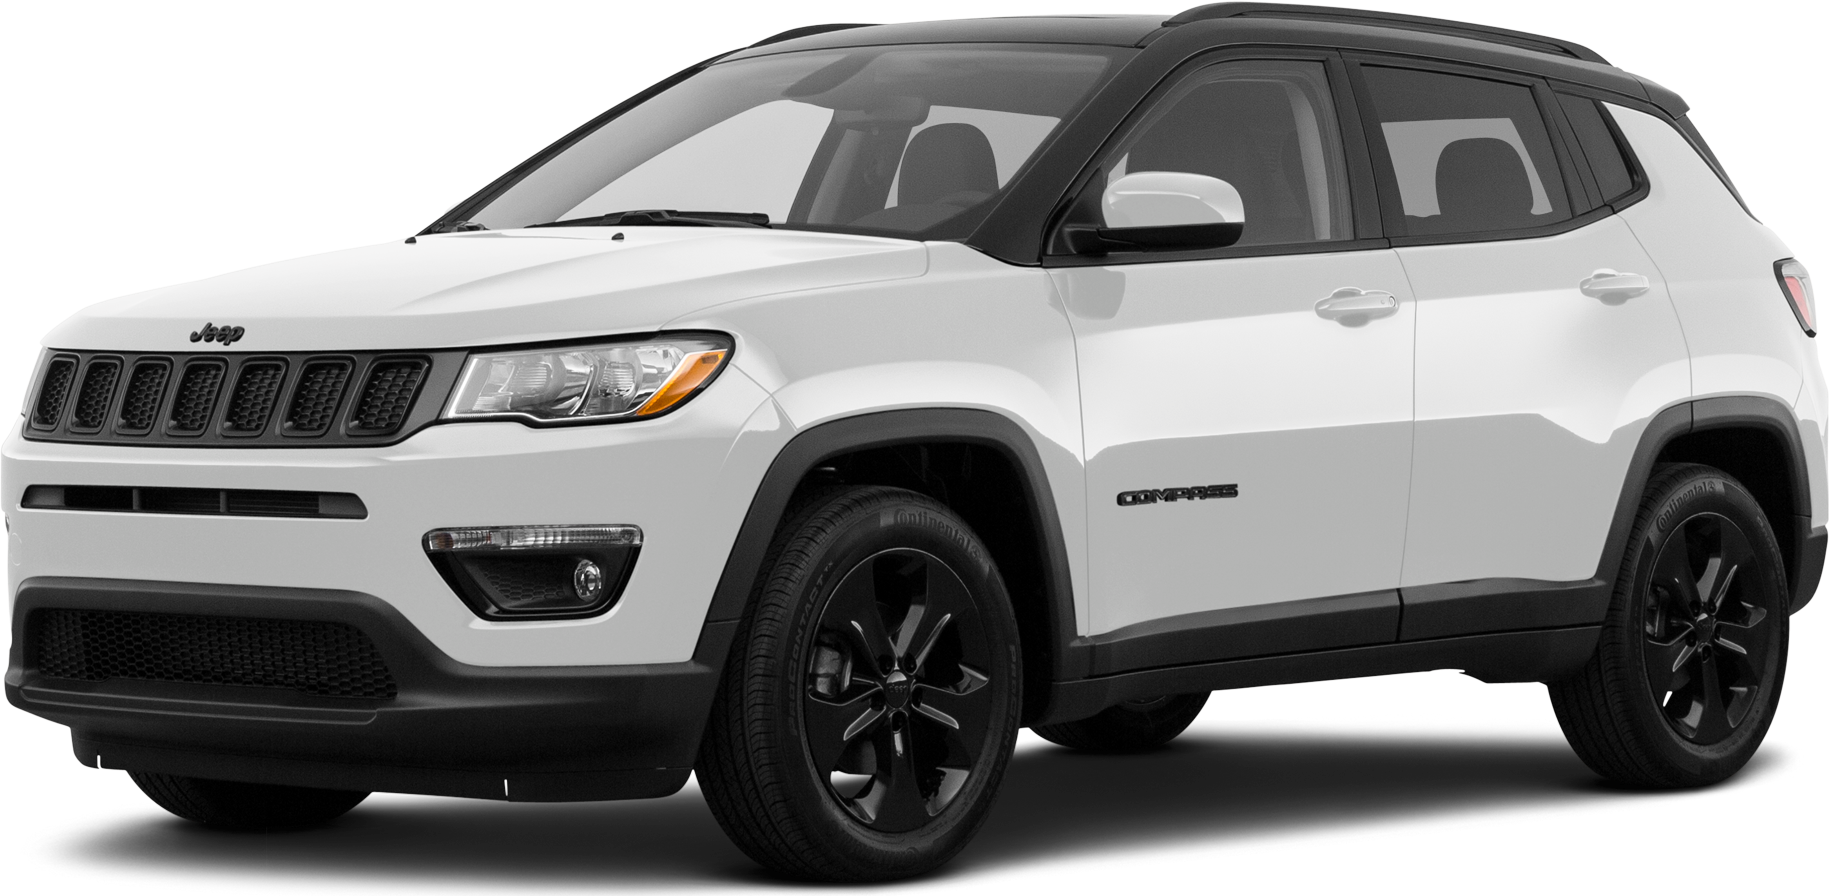 2021 Jeep Compass Price Value Ratings And Reviews Kelley Blue Book